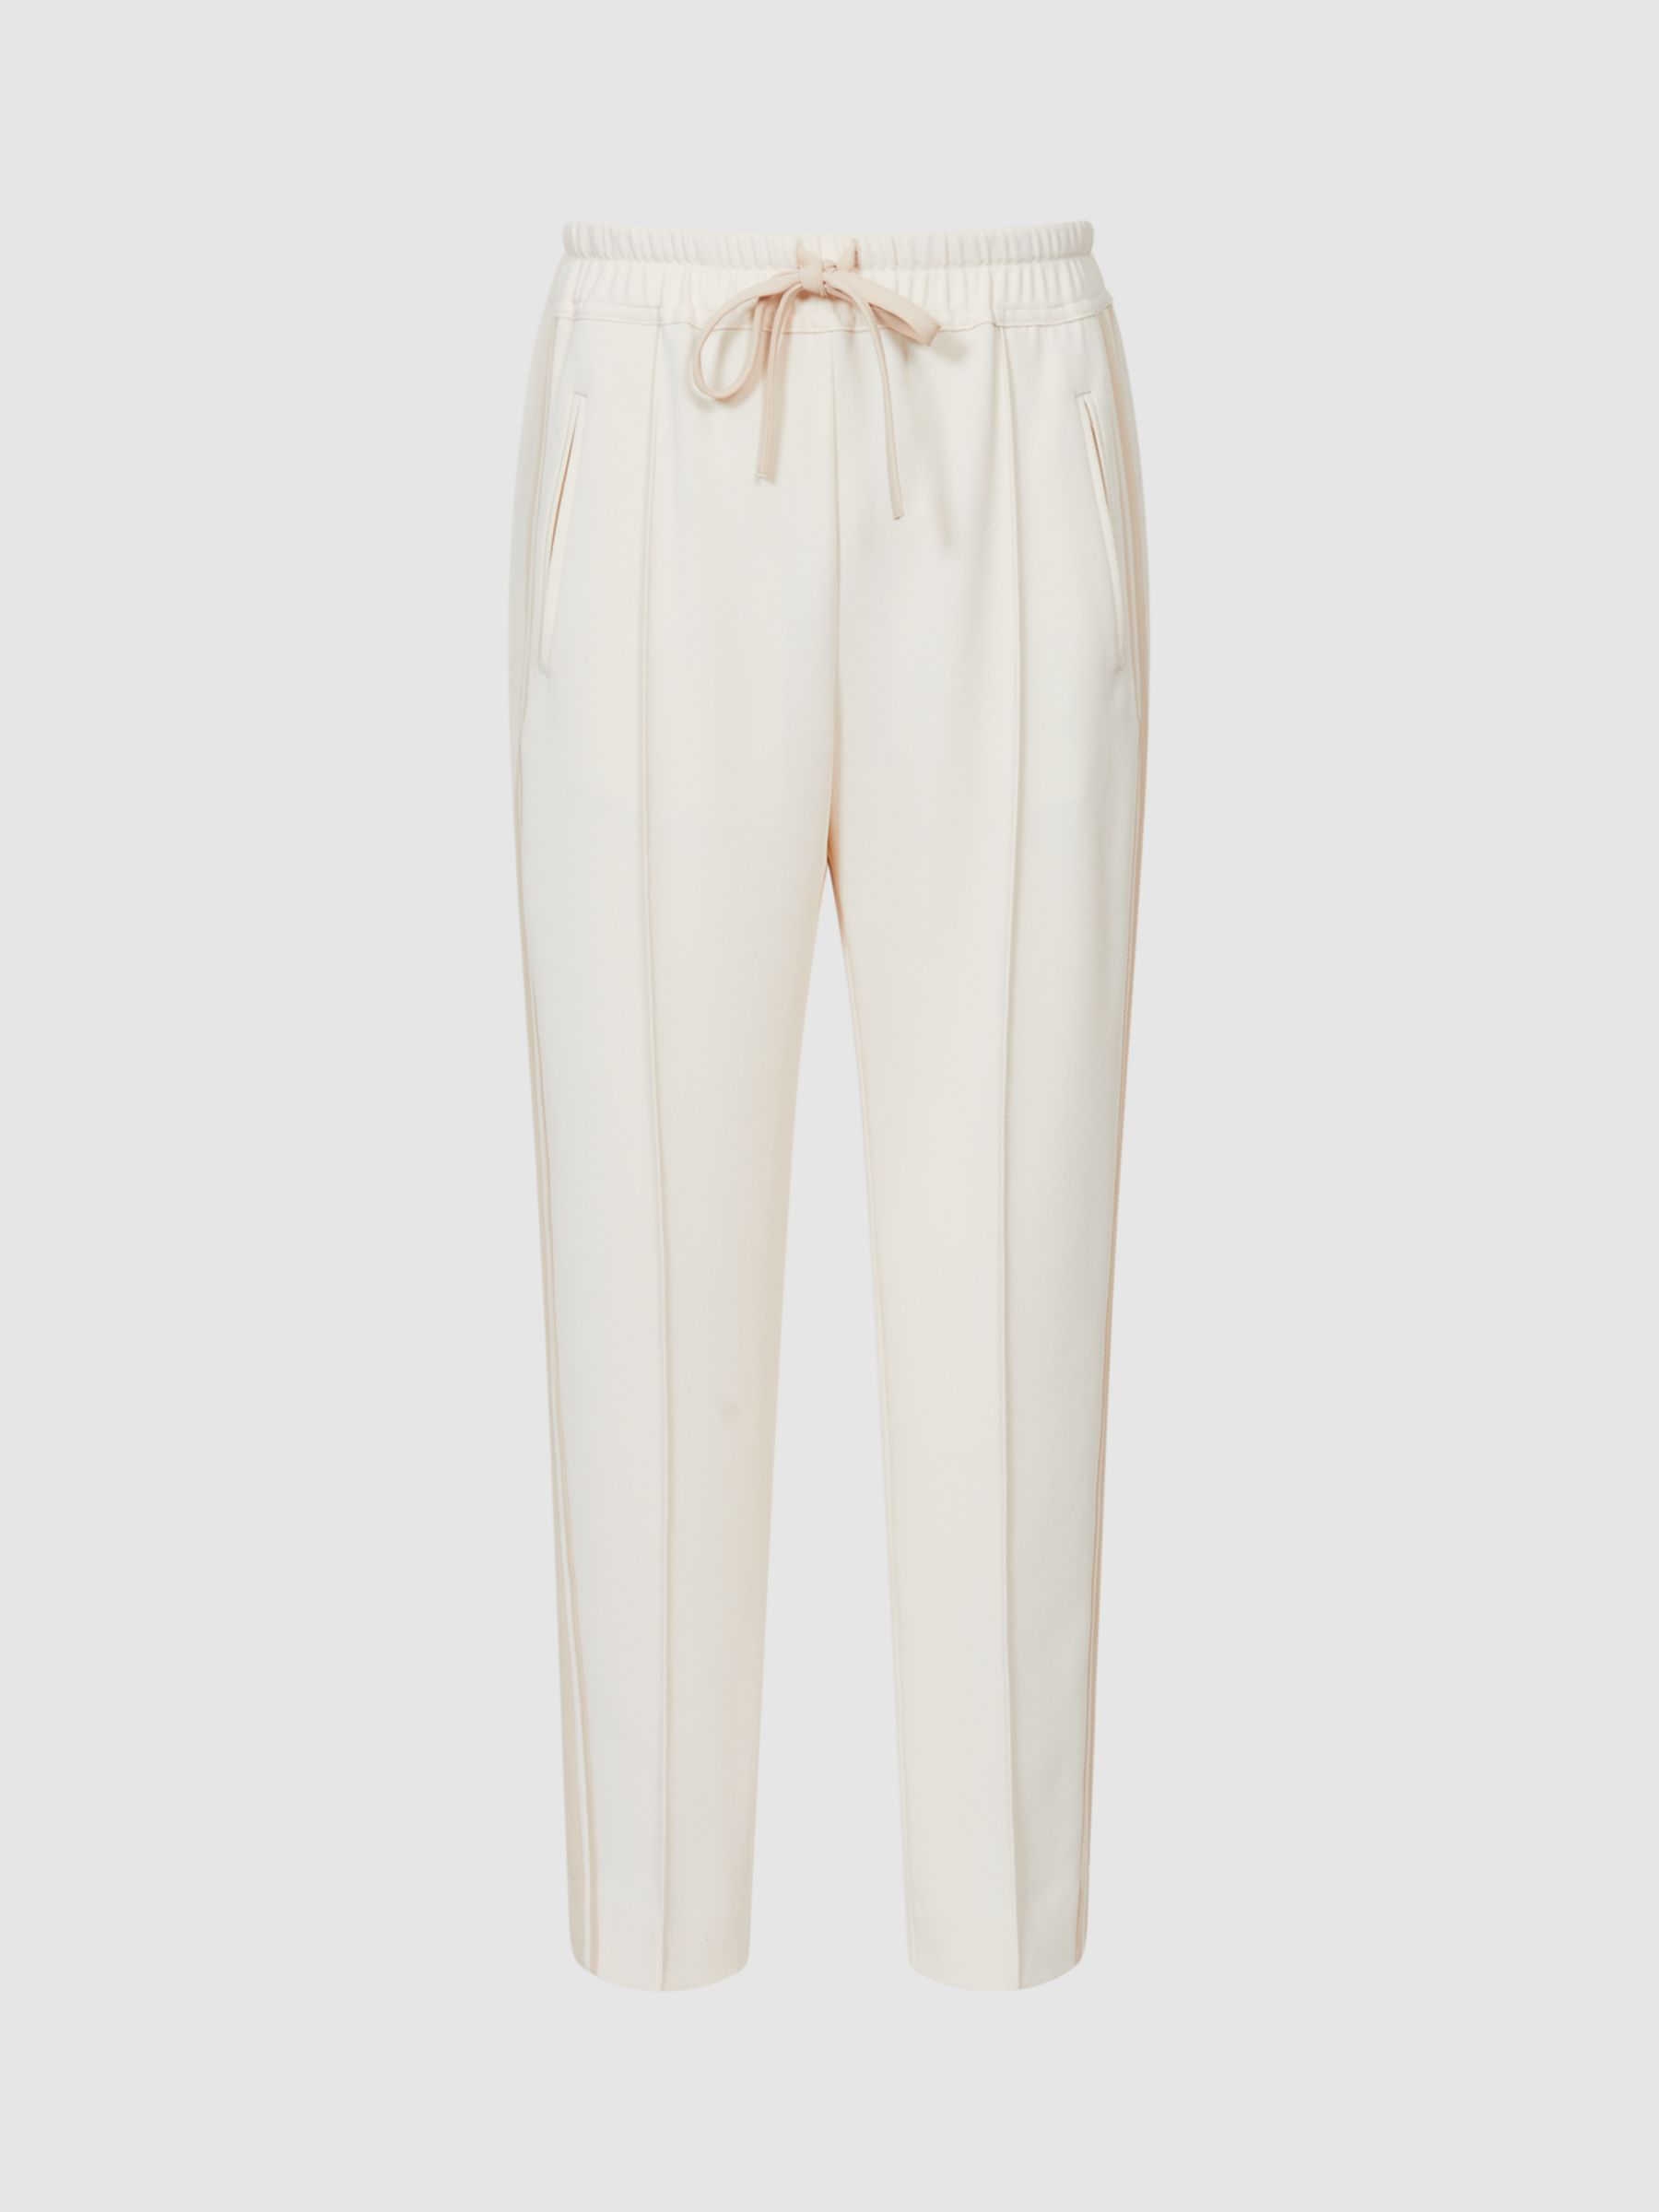 Reiss Side Stripe Tapered Trousers, Cream, 8